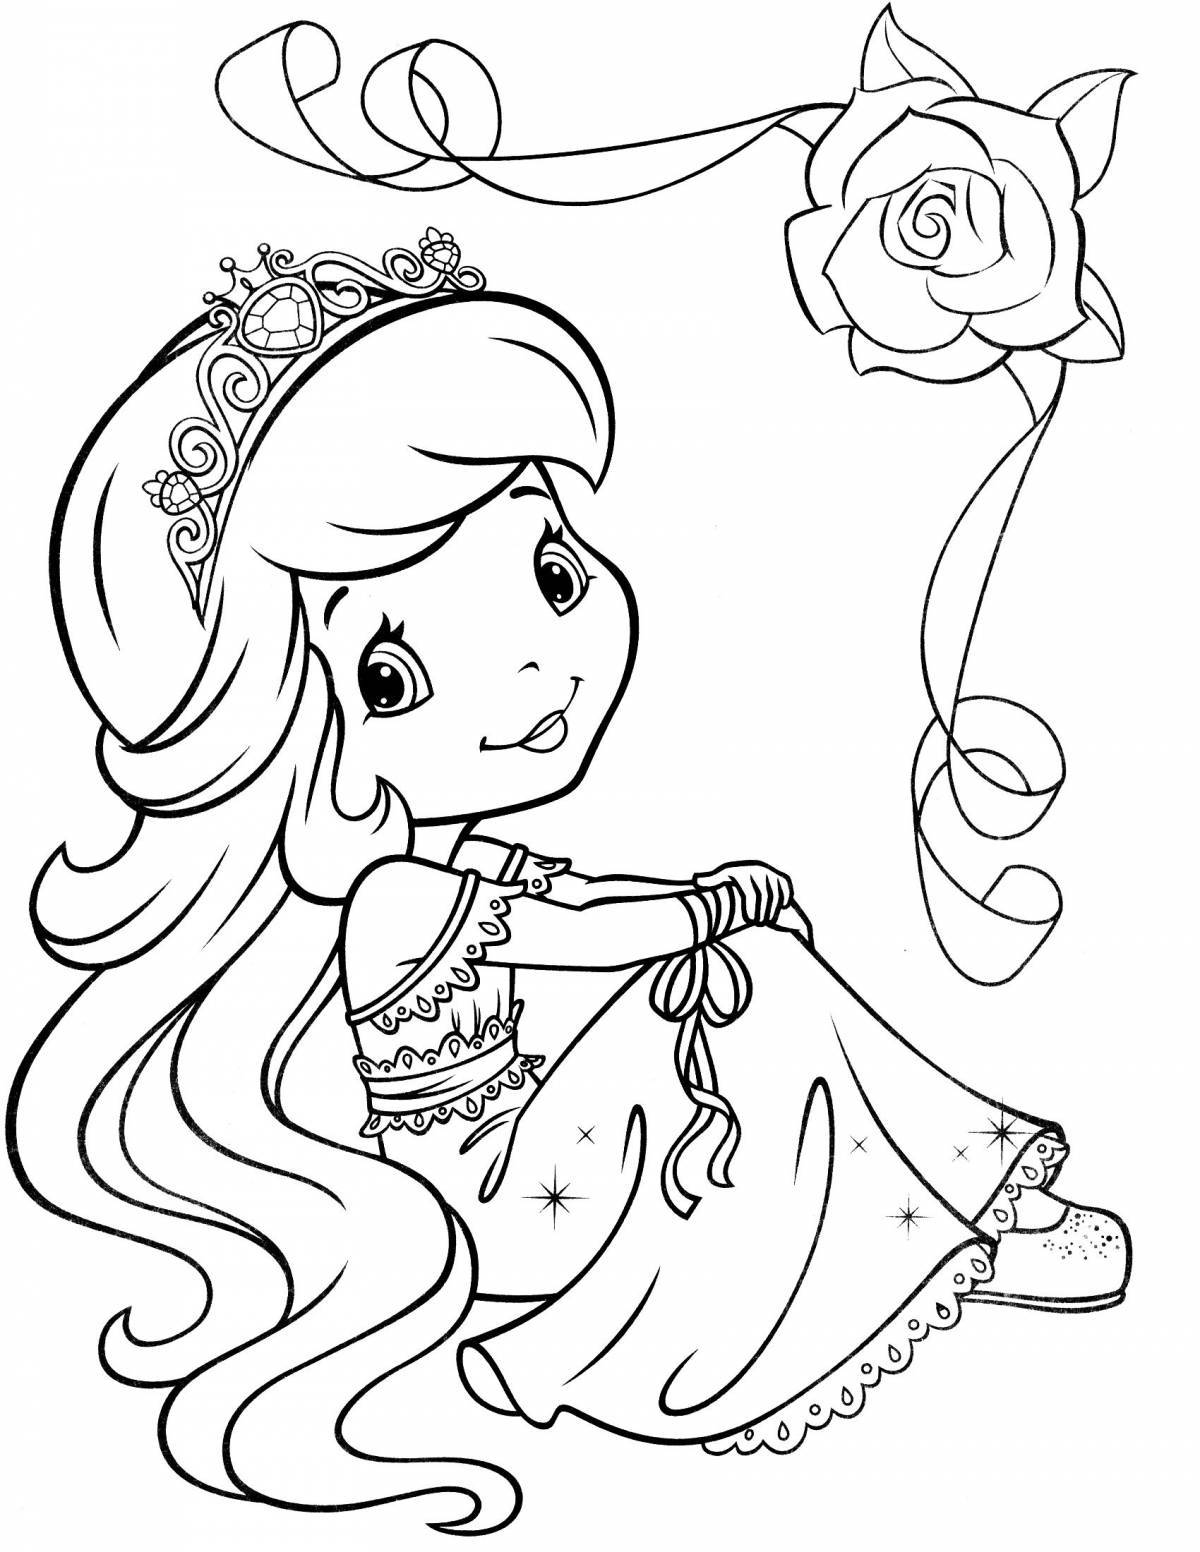 Dazzling coloring book for children 6-7 years old princess